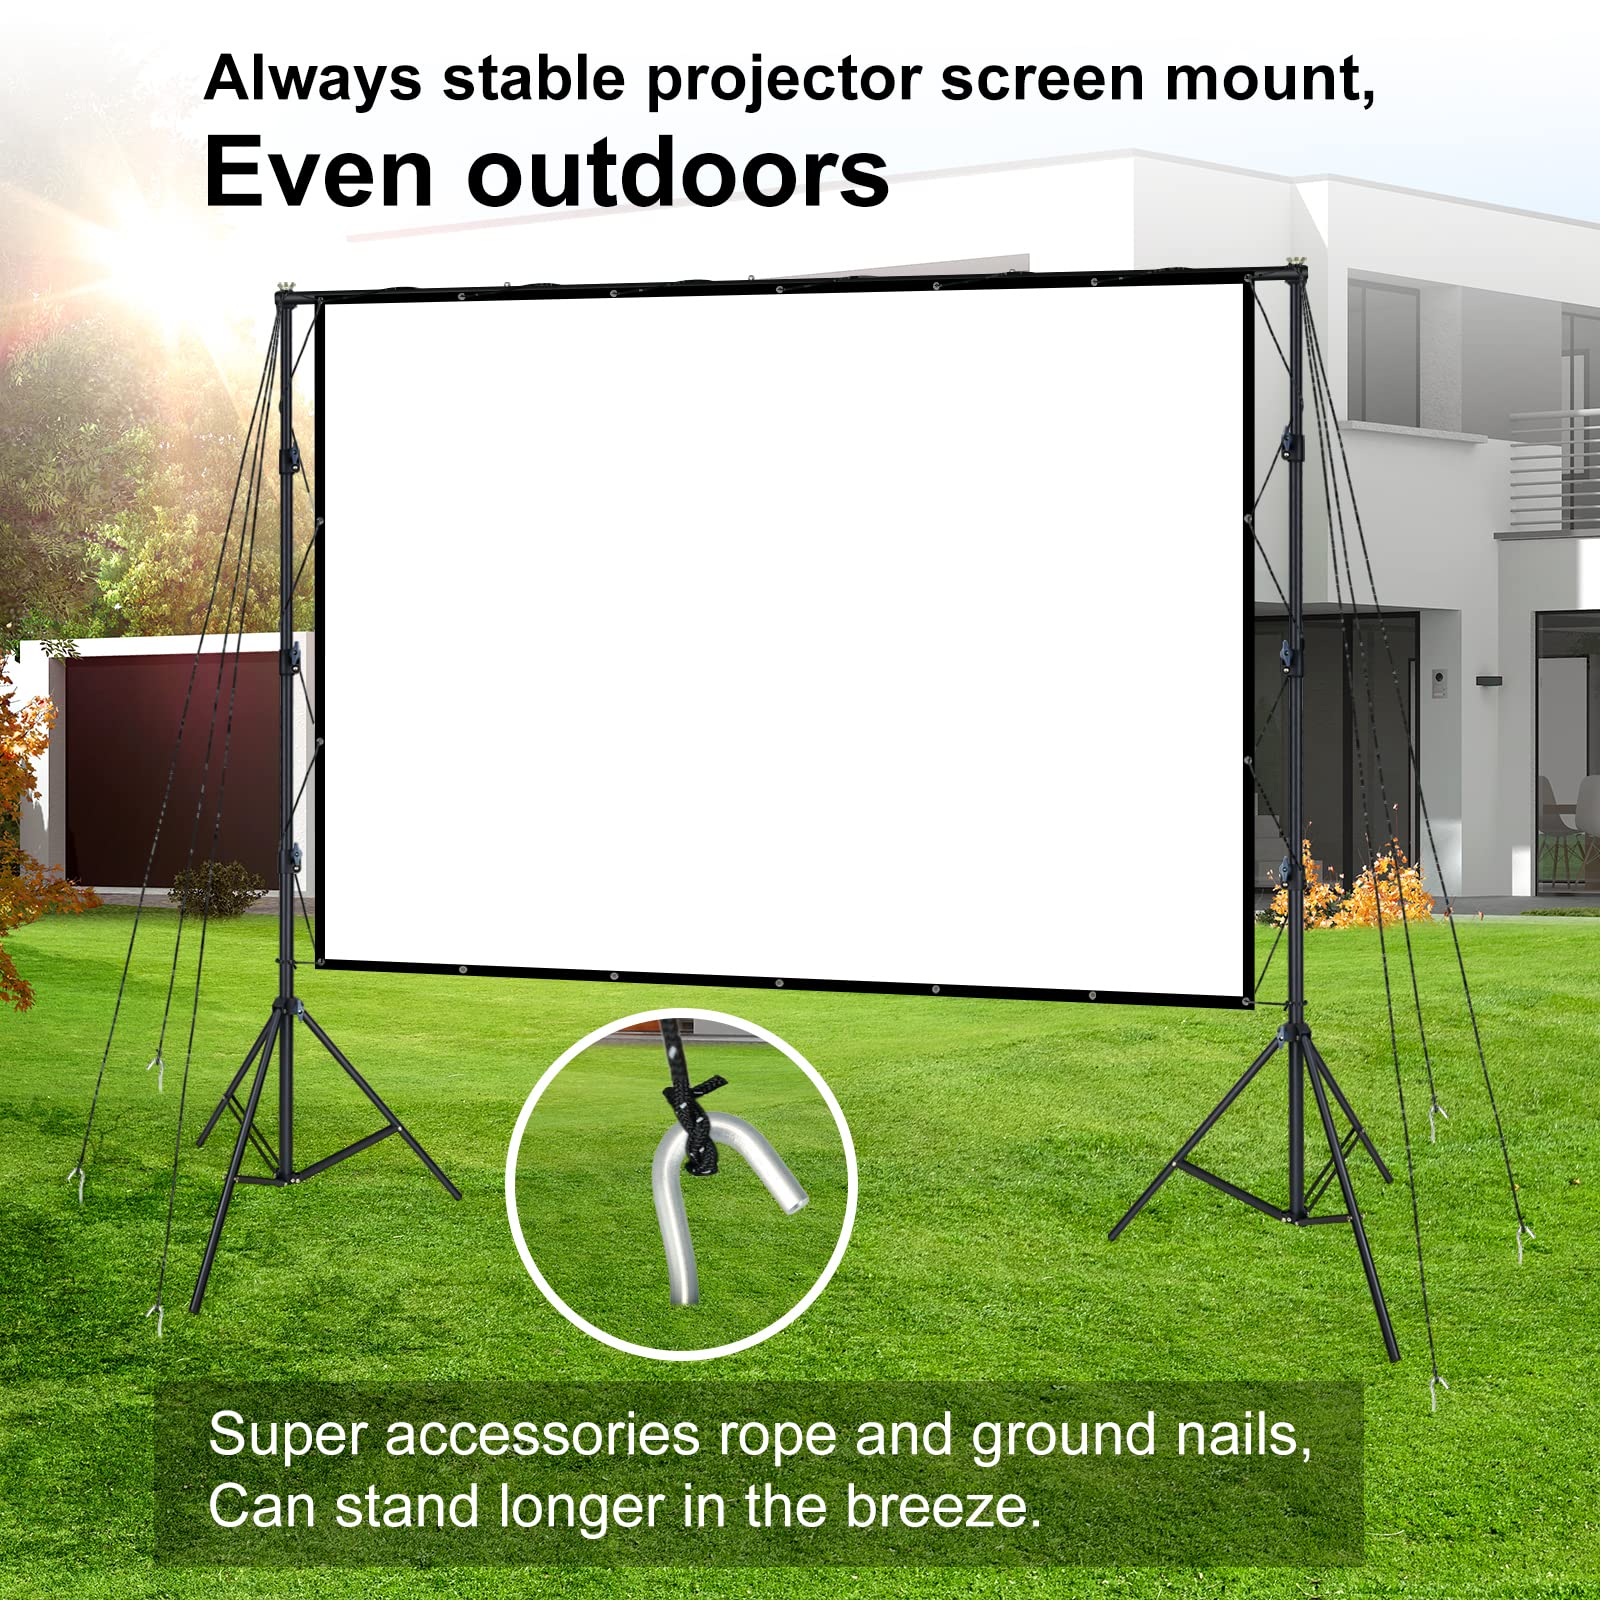 LINCO Projector Screen with Stand, 150inch Outdoor Movie Projector Screen 4K HD 16: 9 Wrinkle Free Design for Backyard Movie Night (Easy to Clean, 1.1Gain, 160° Viewing Angle & A Carry Bag)